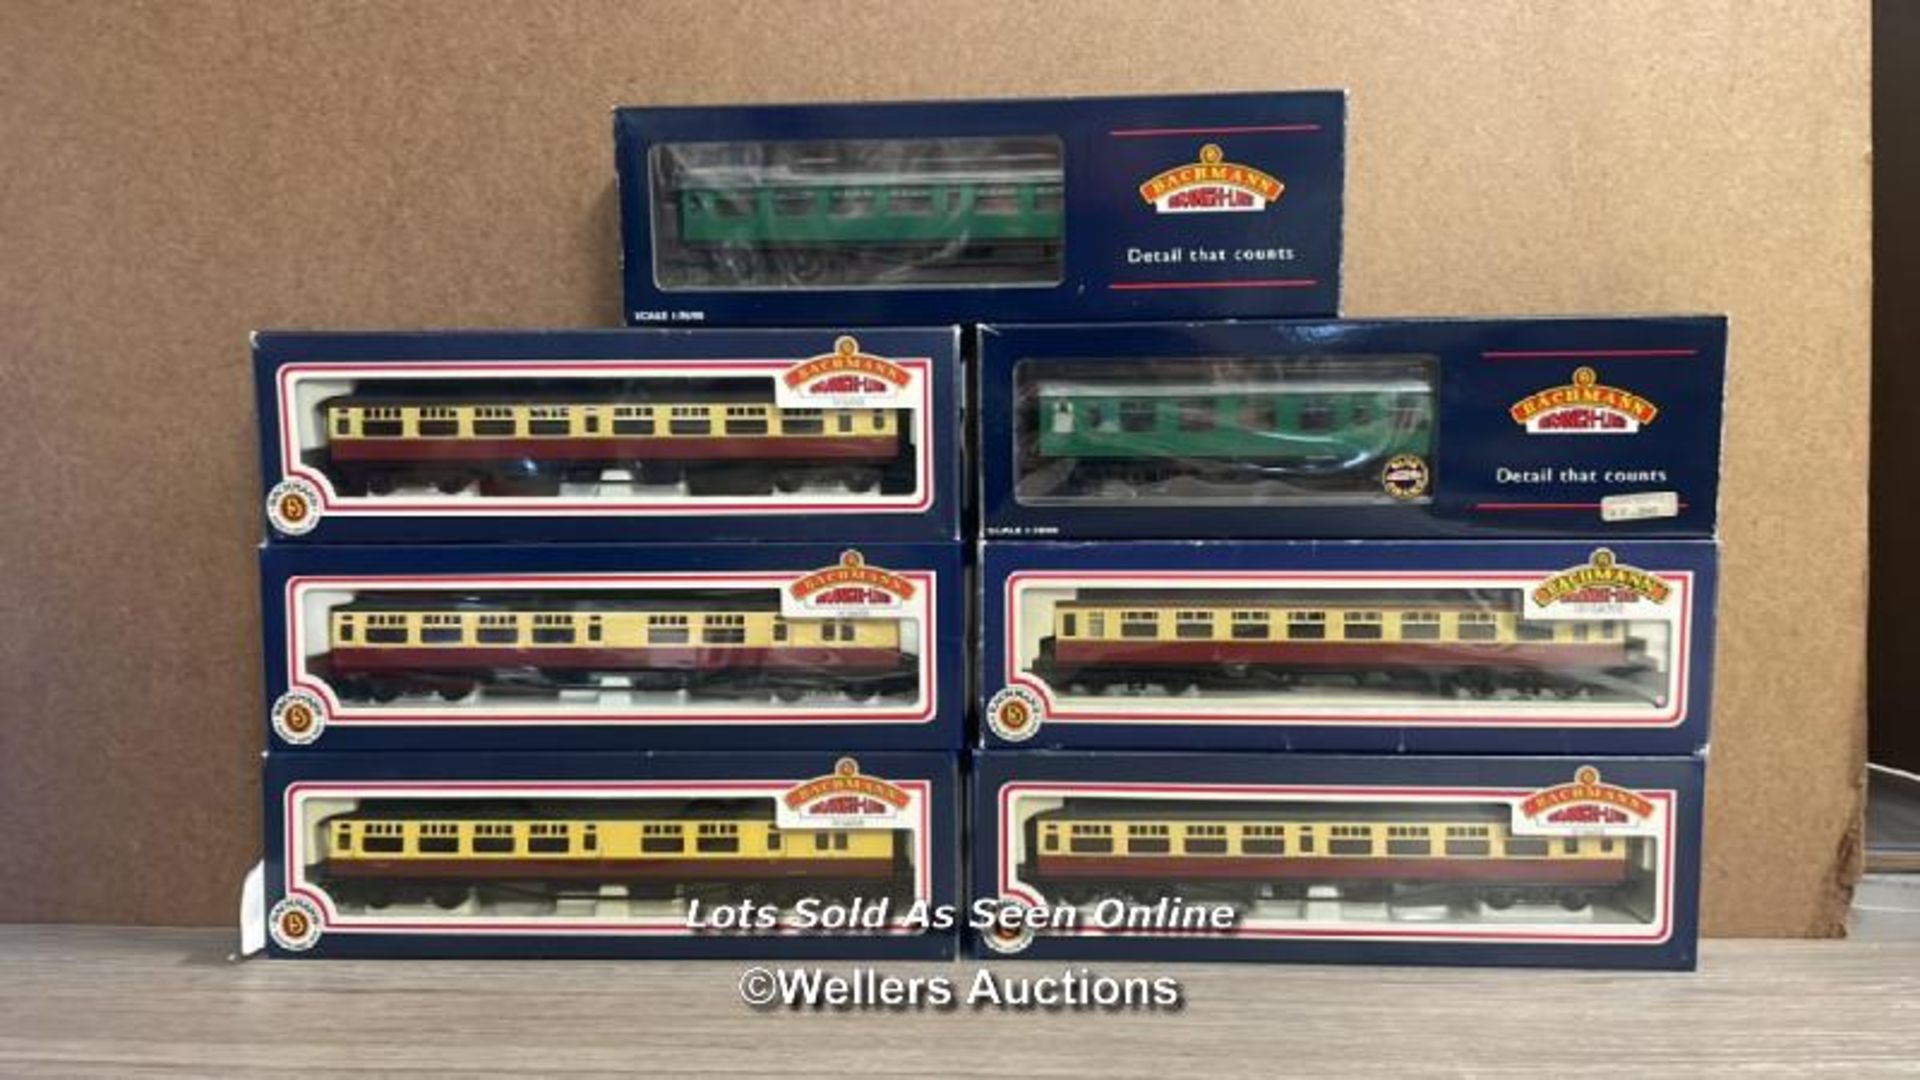 BACHMANN 00 SCALE, SEVEN CARRIAGES, BOXED, SEE PHOTOS FOR DETAILS